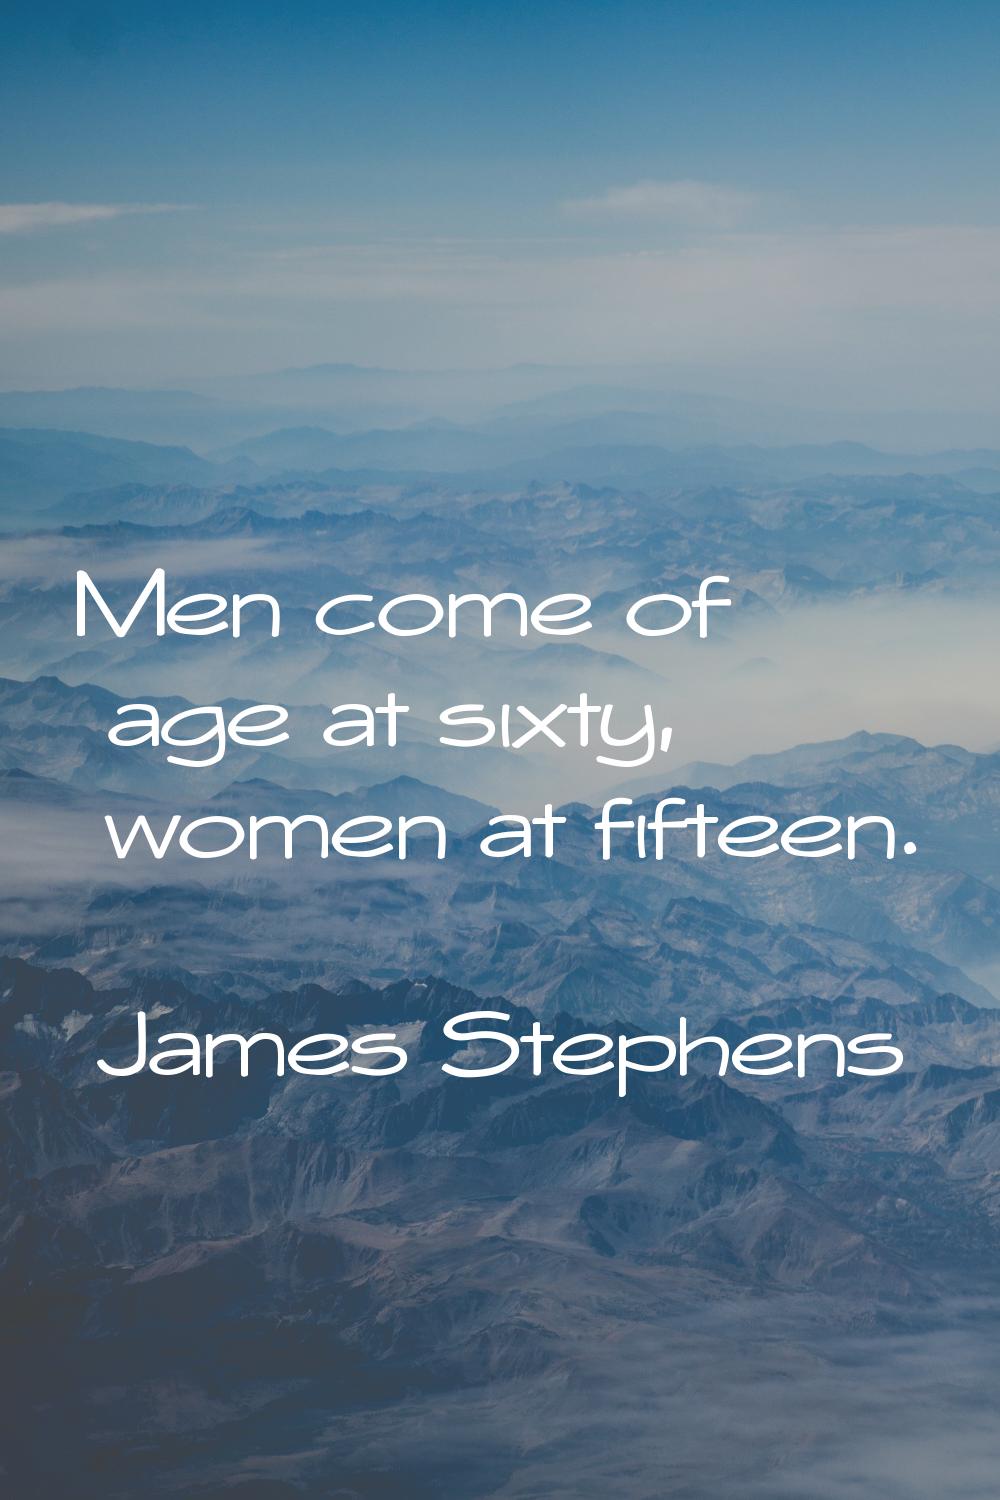 Men come of age at sixty, women at fifteen.